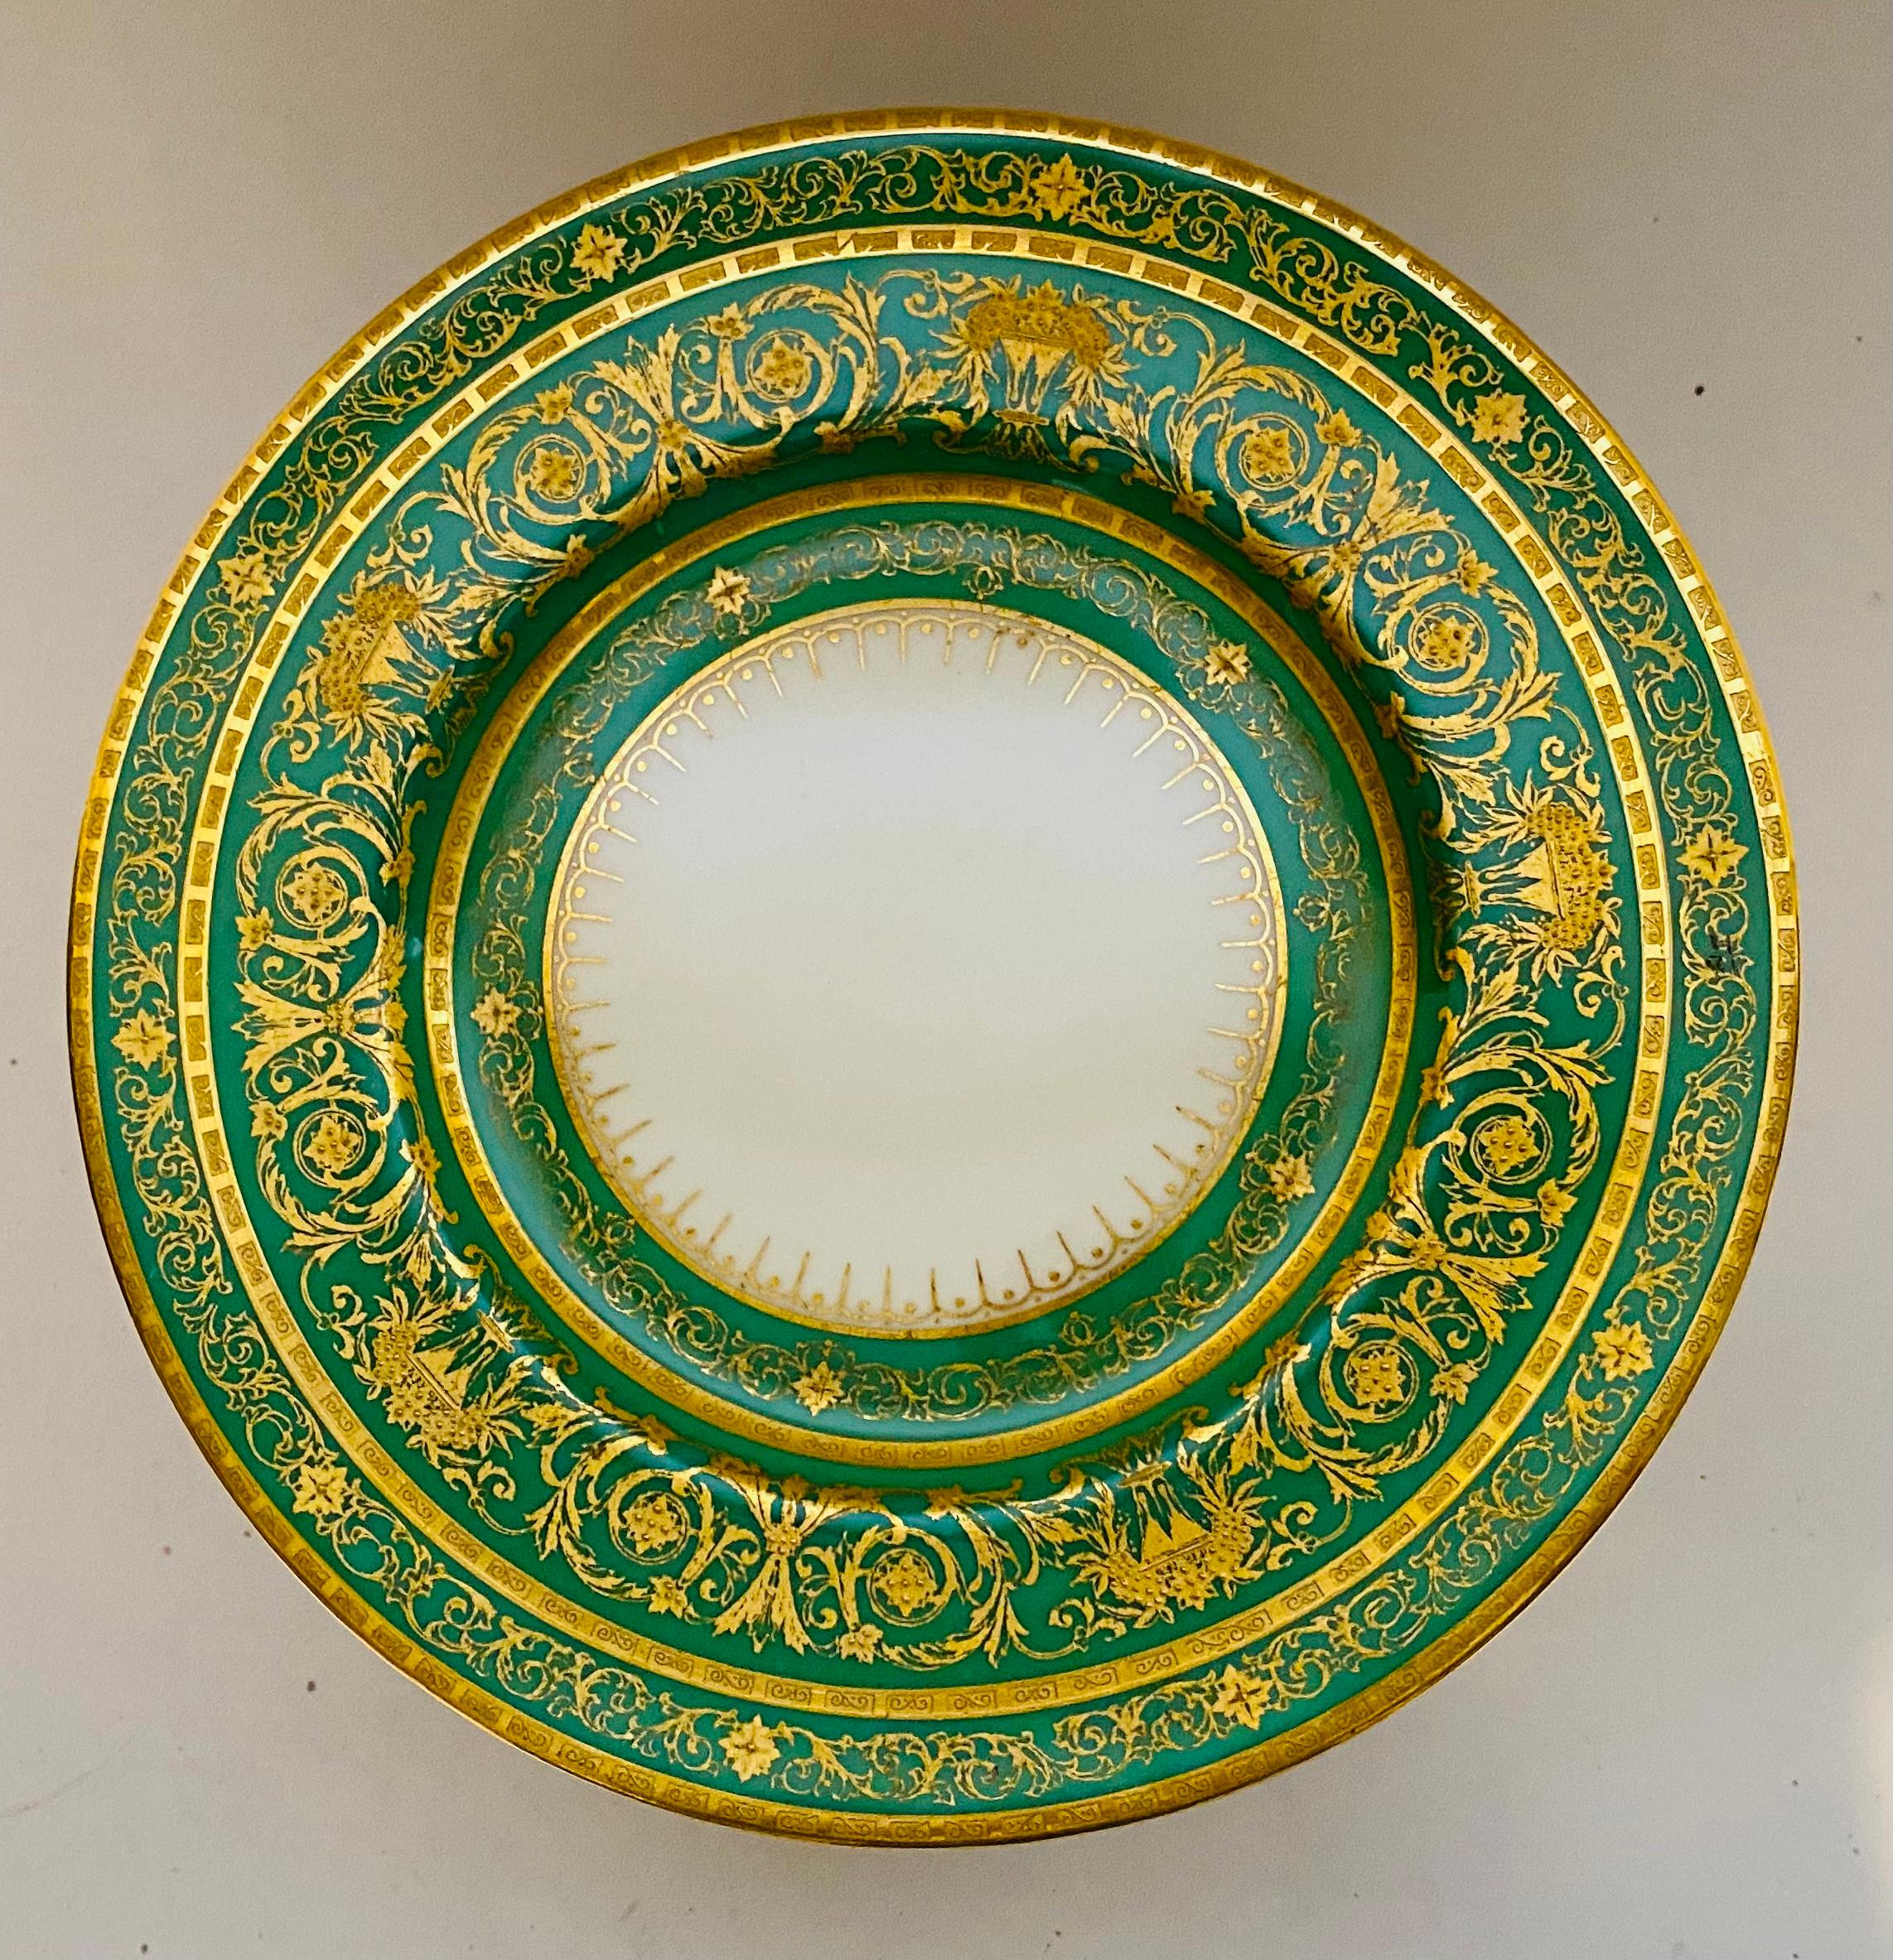 Neoclassical Set of 18 Green & Heavily Gilt Encrusted Dessert/Salad Plates Antique English